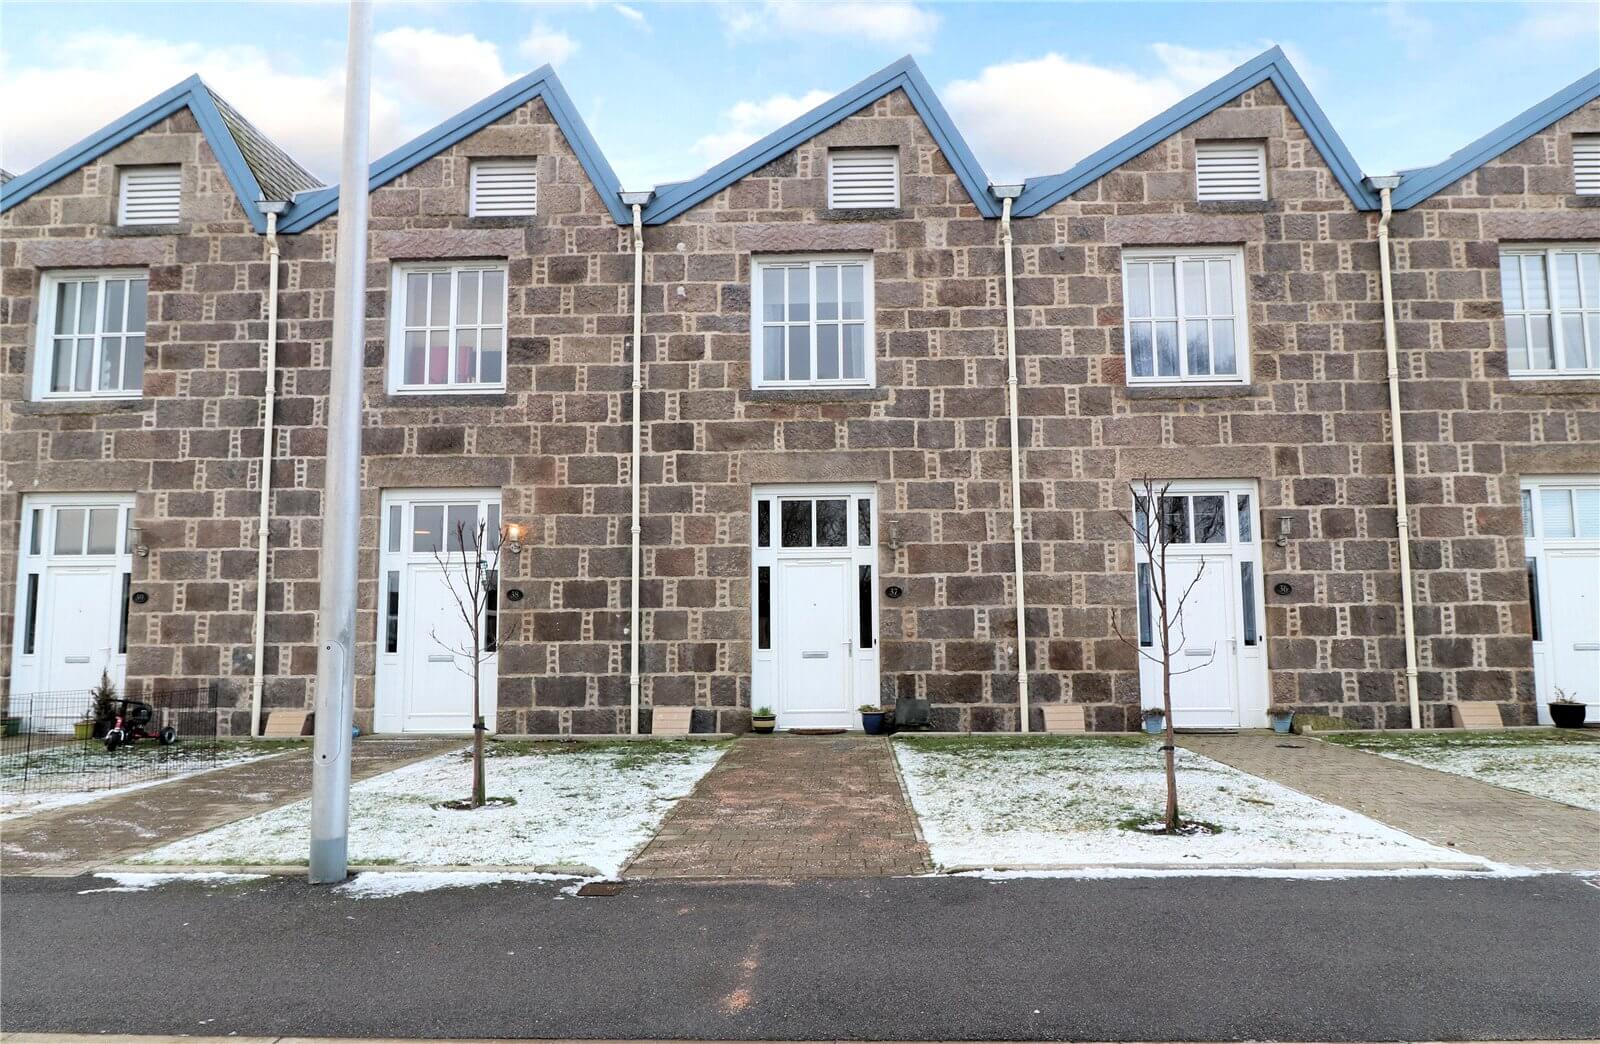 Our latest properties for sale and to let (5th February 2019)